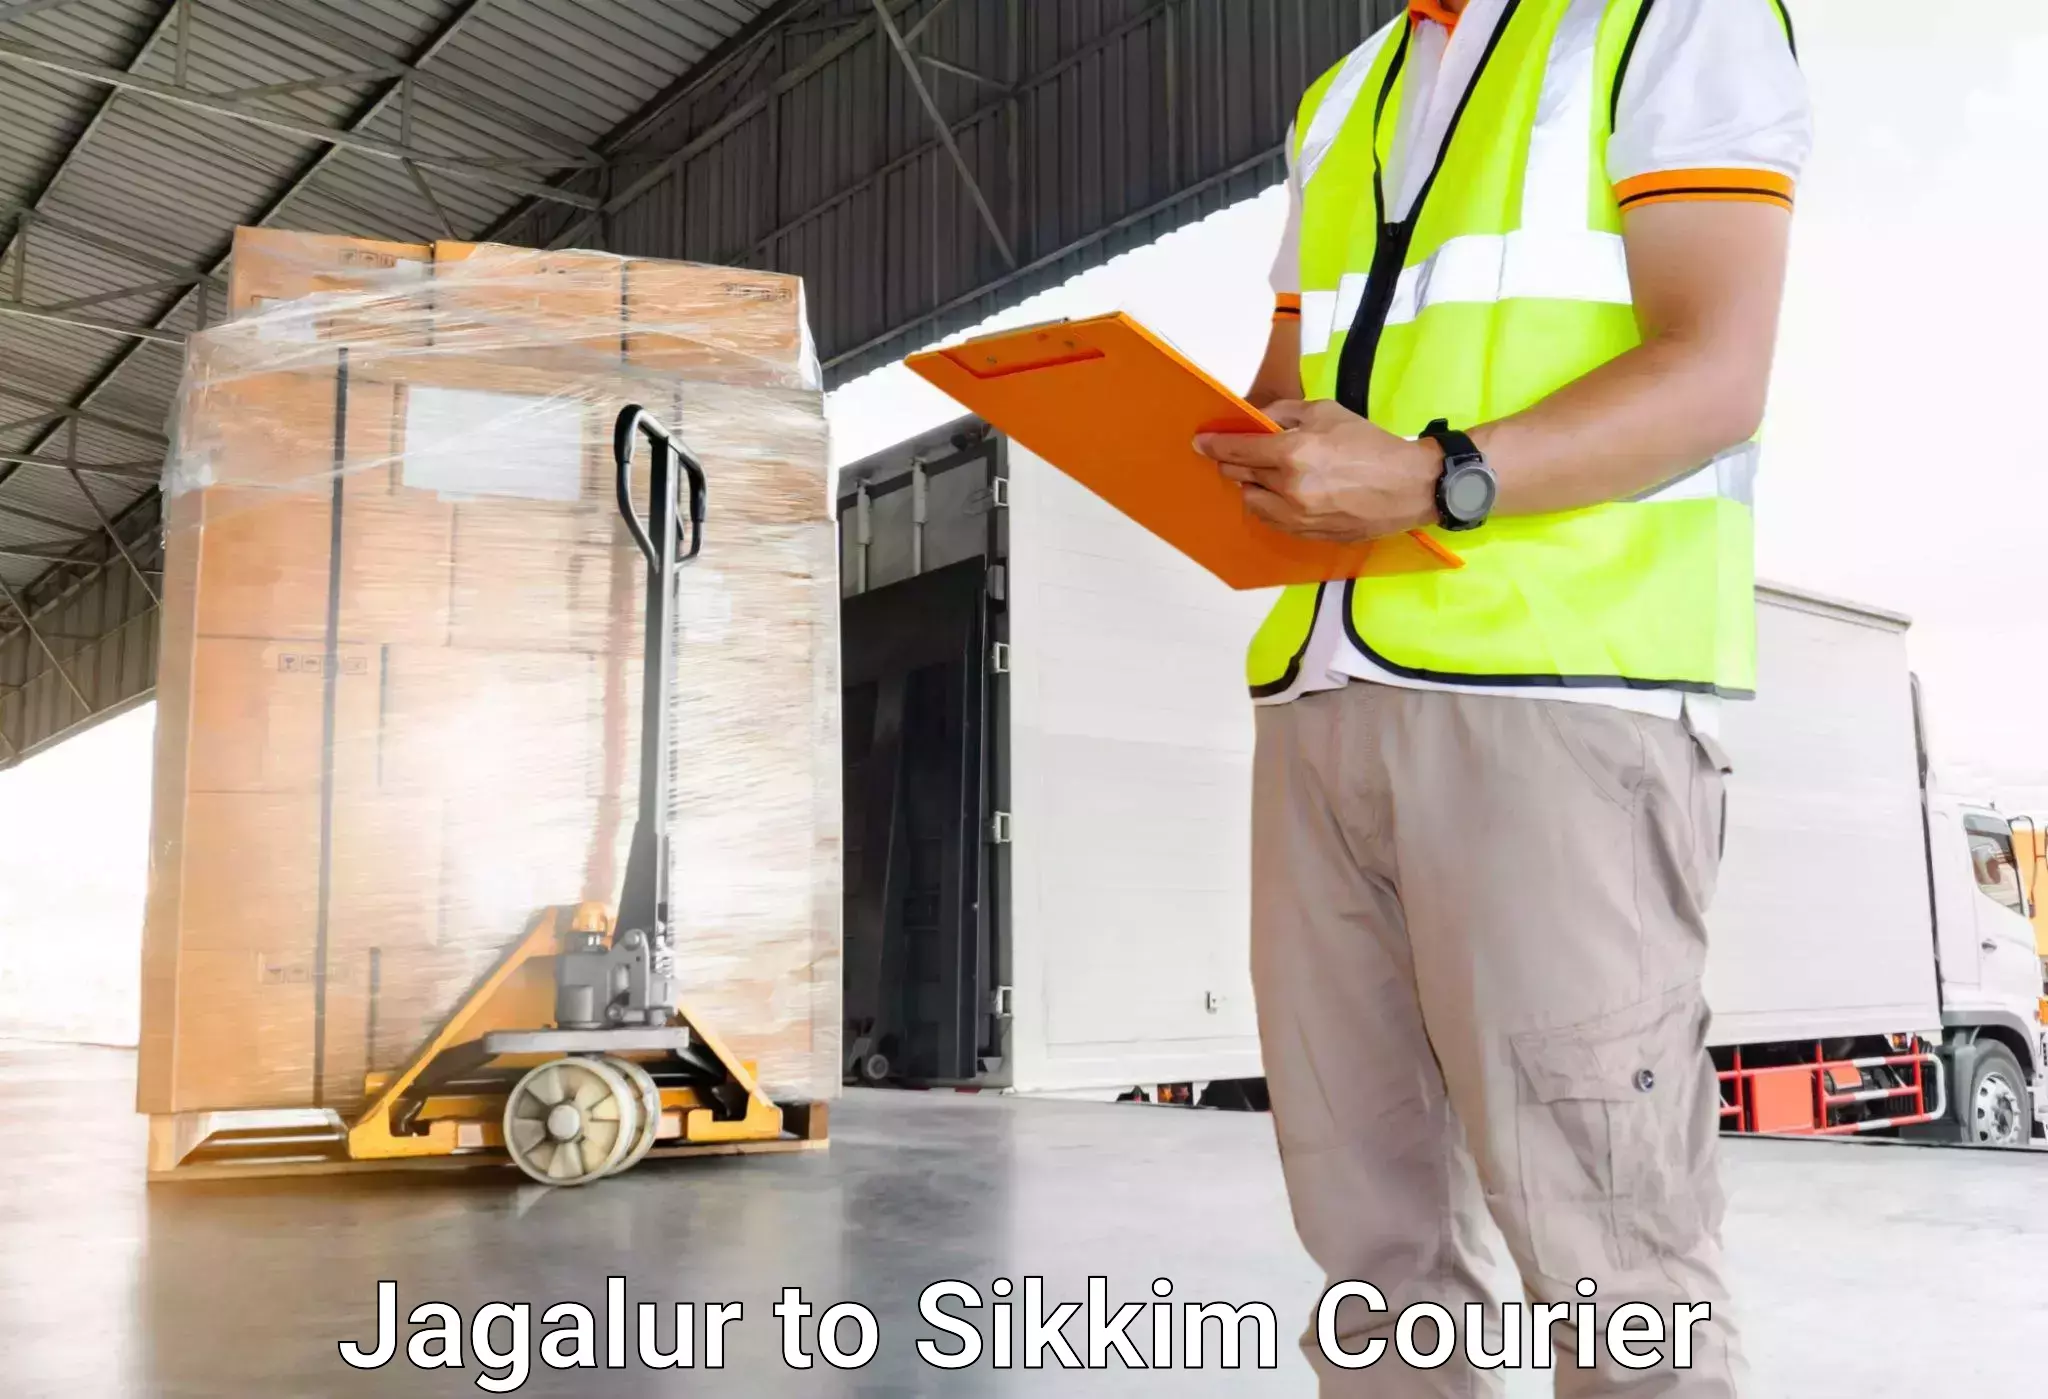 Urgent luggage shipment Jagalur to Pelling